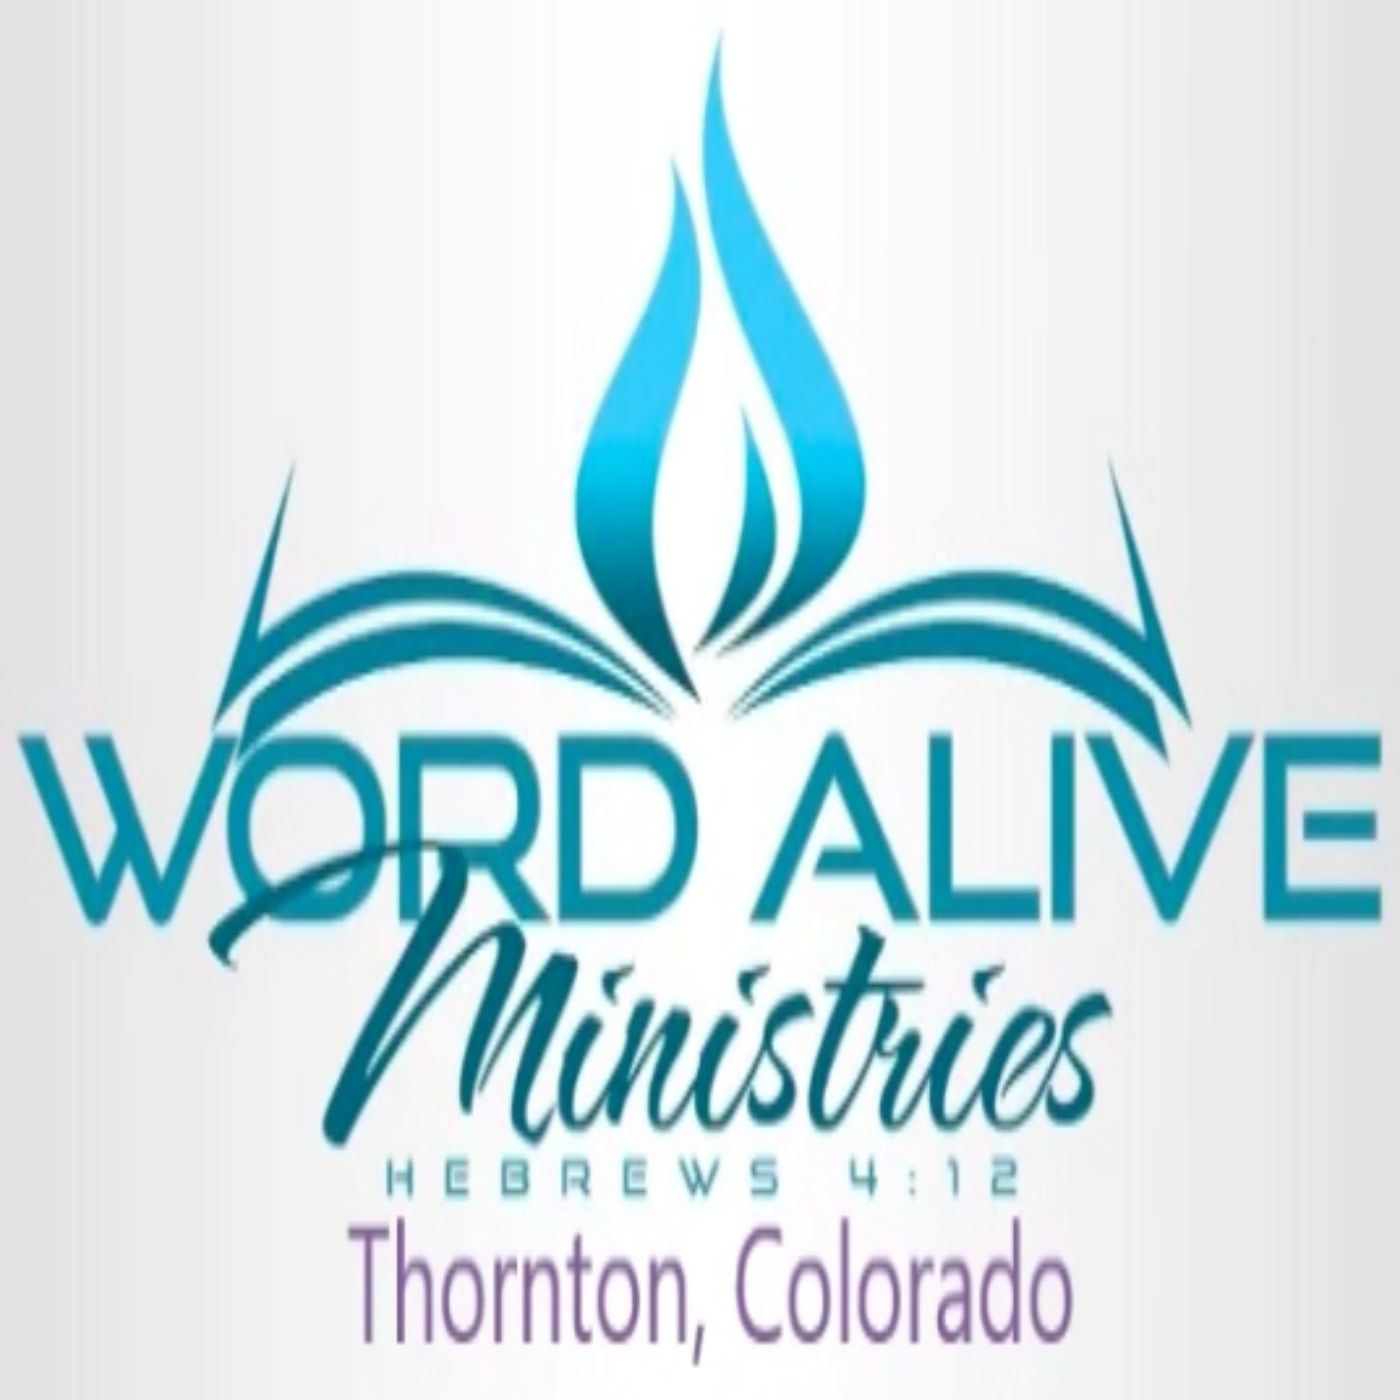 Word Alive Ministries Church